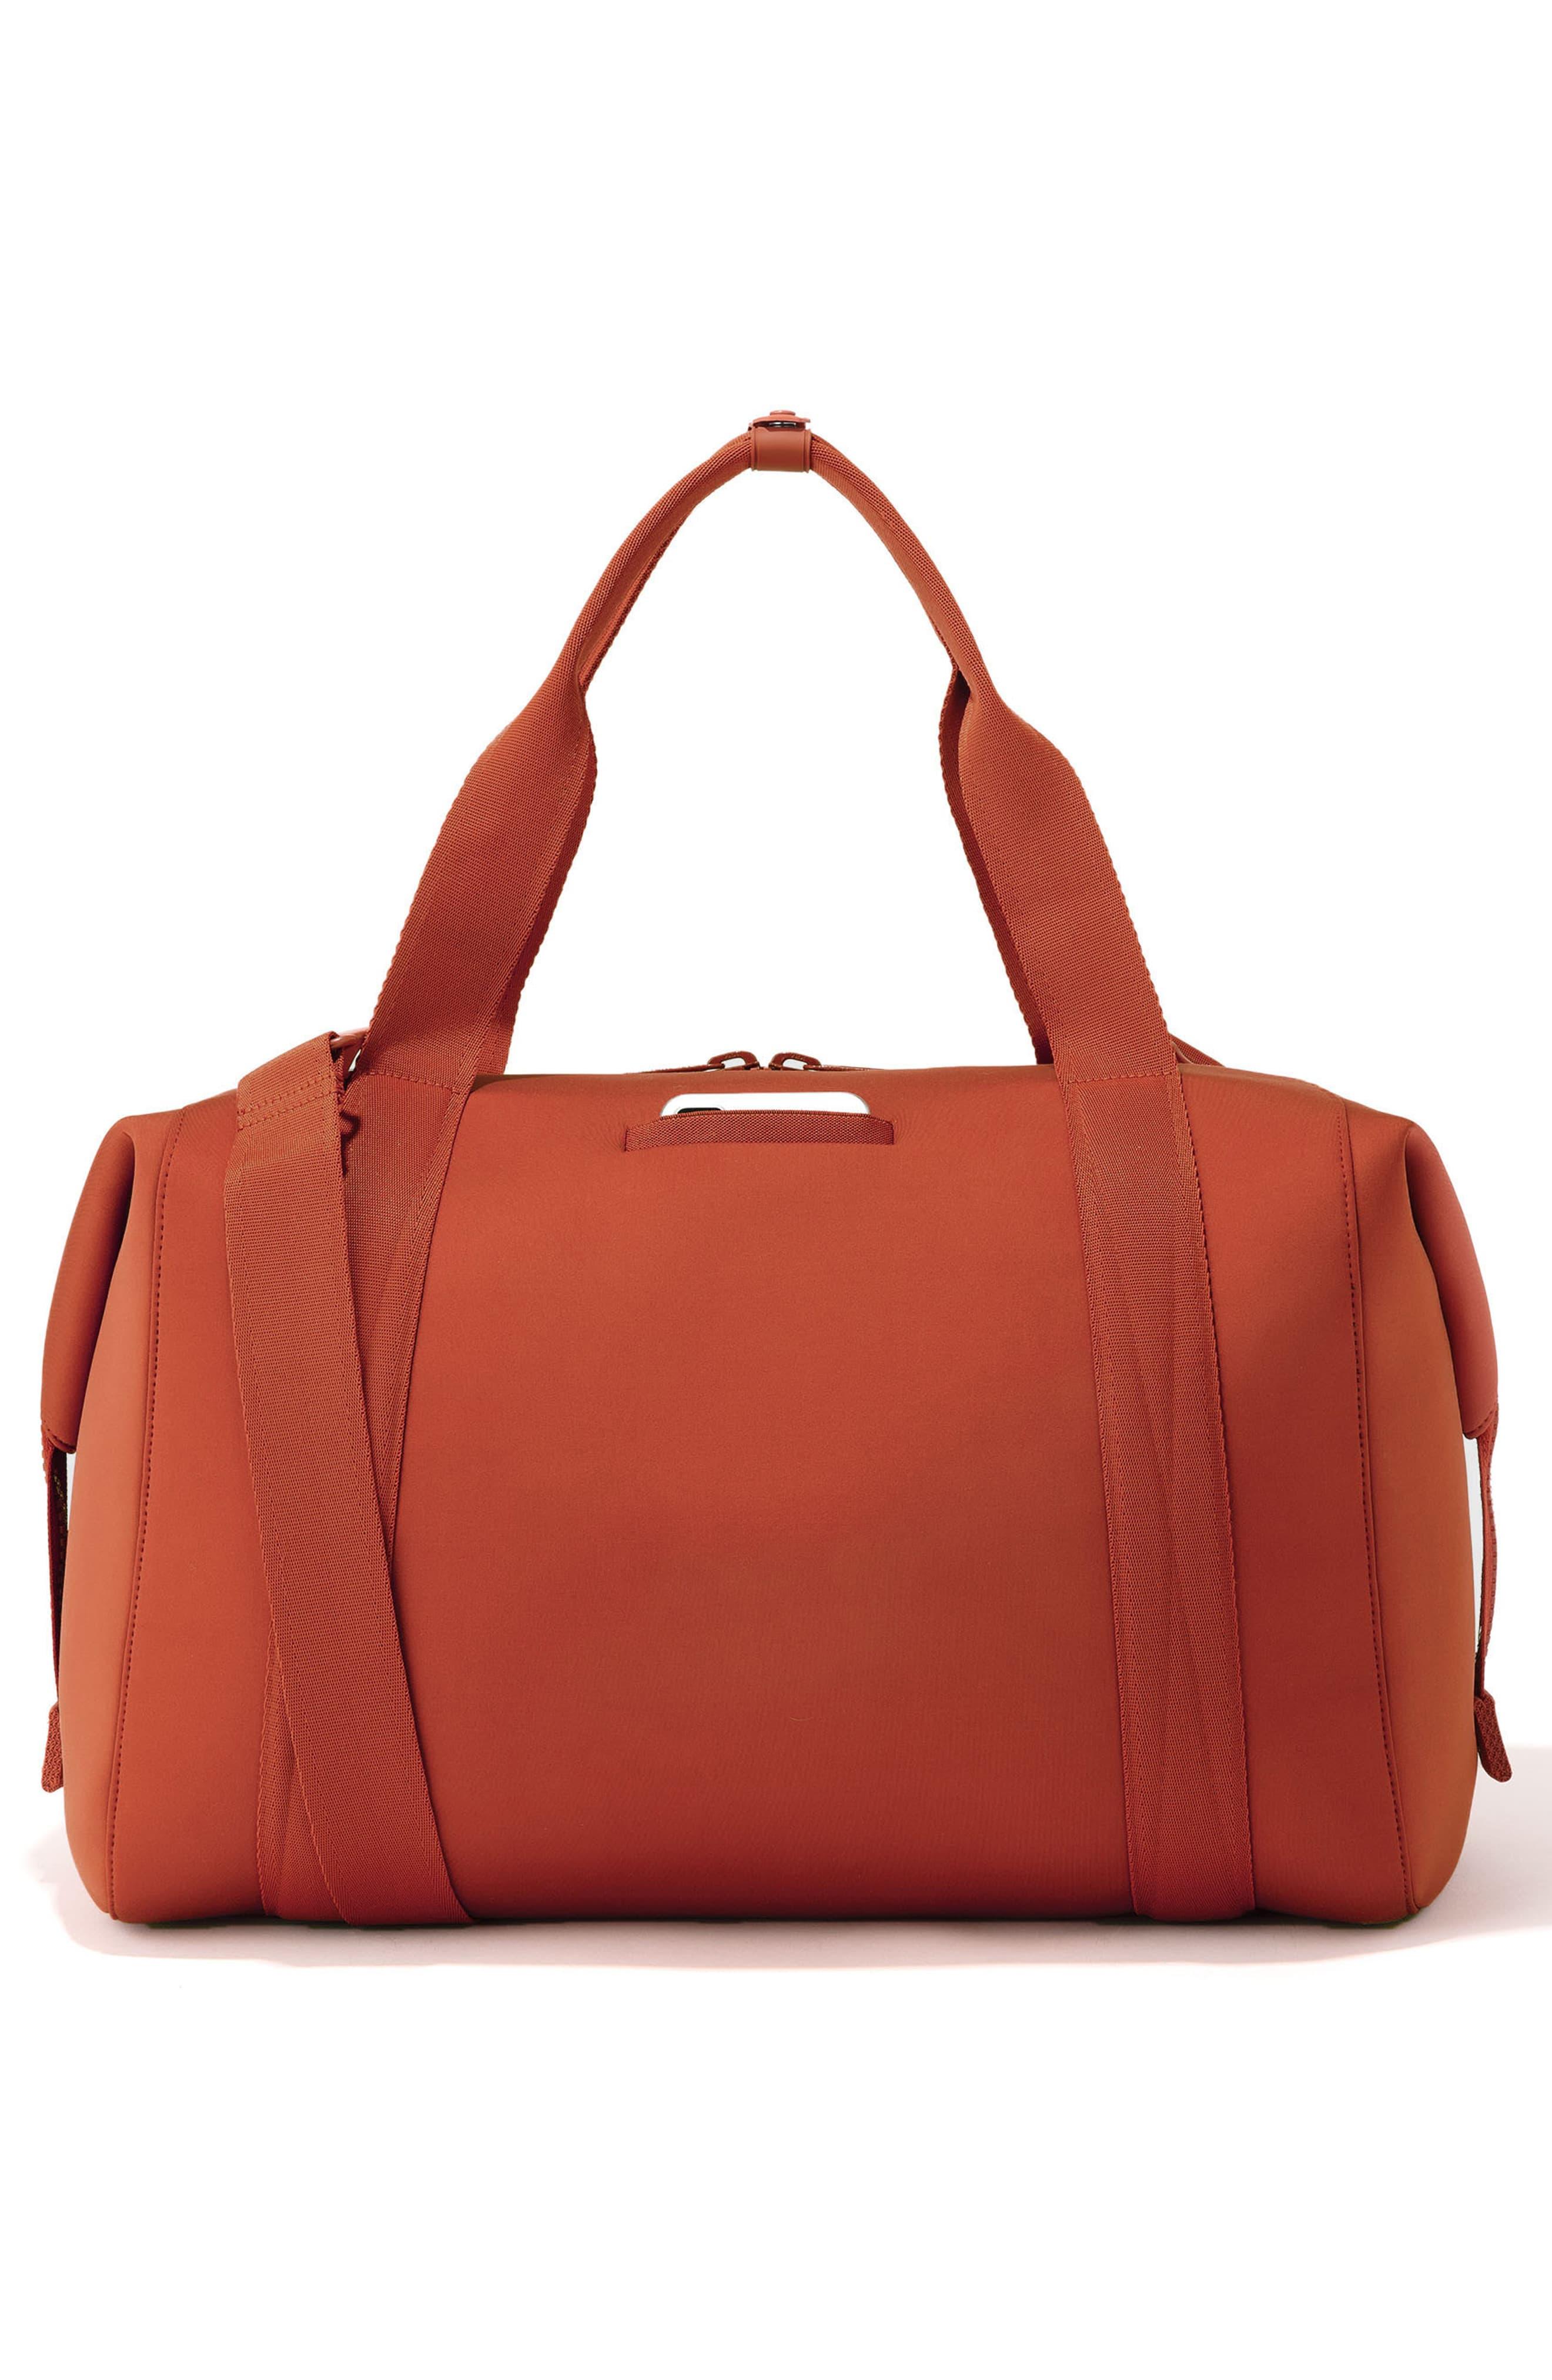 Dagne Dover Xl Landon Carryall Duffle Bag in Clay Red (Red) - Lyst